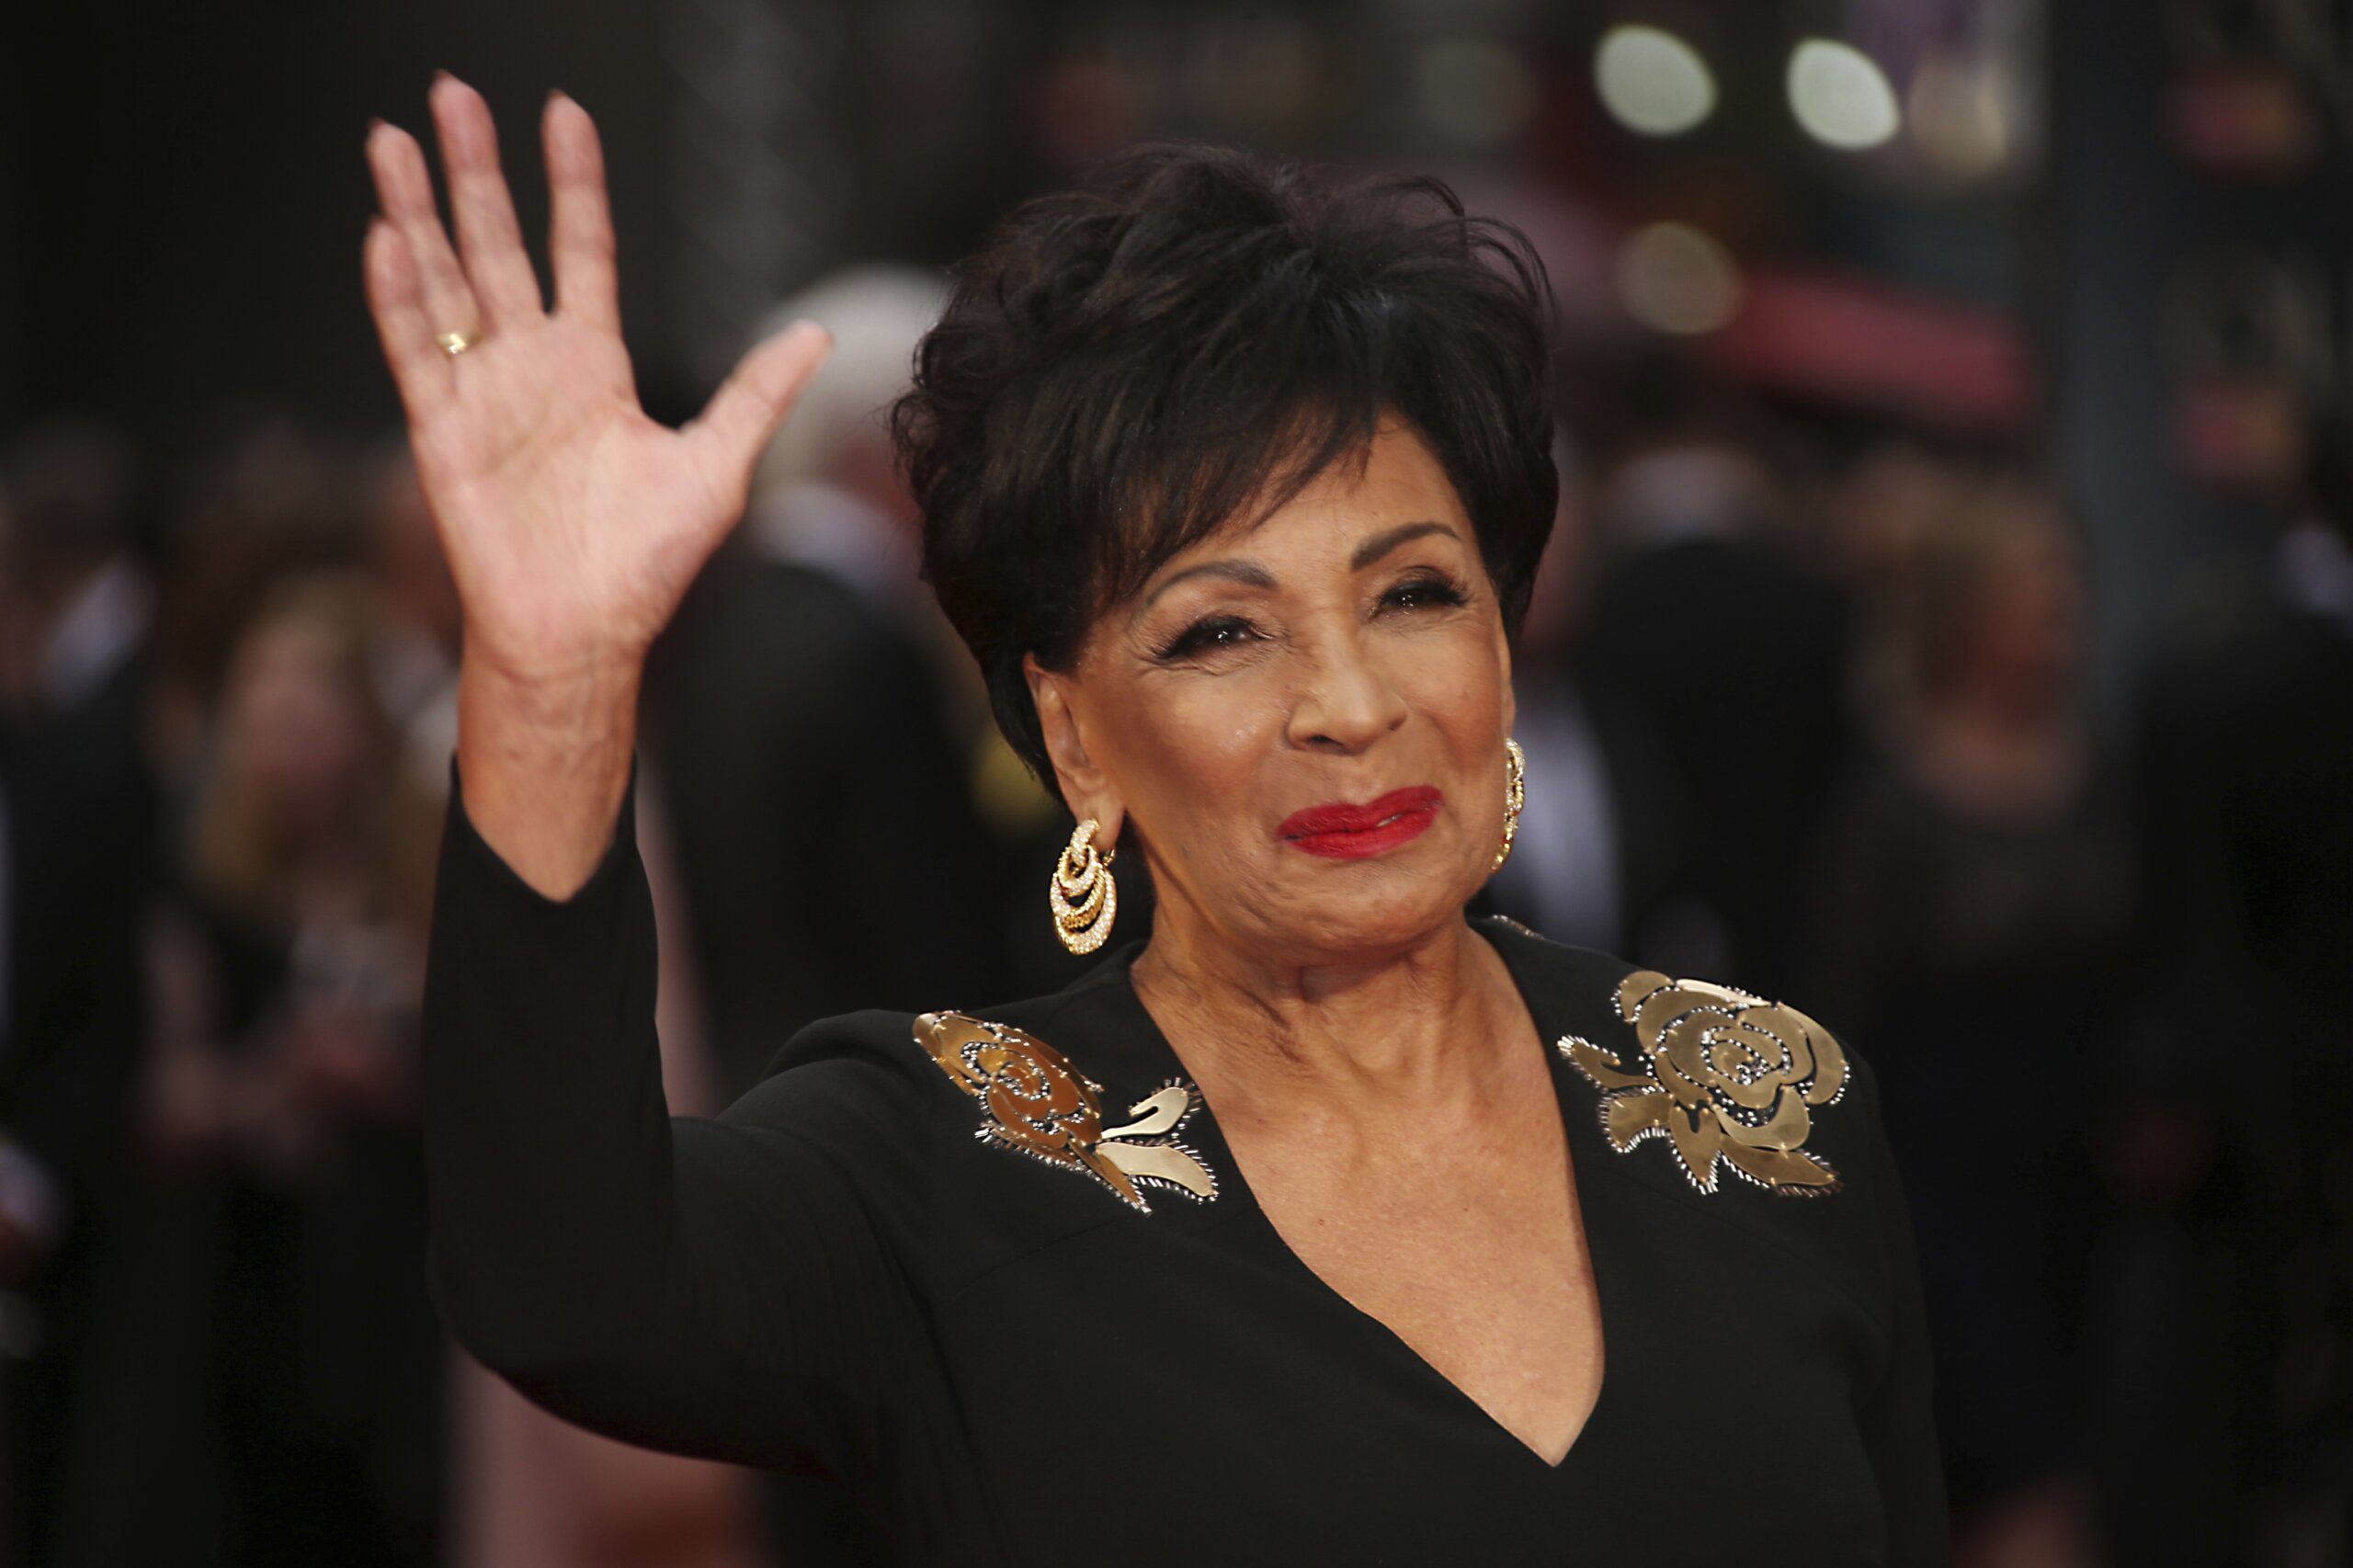 Shirley Bassey and Ridley Scott are among hundreds awarded in UK’s New